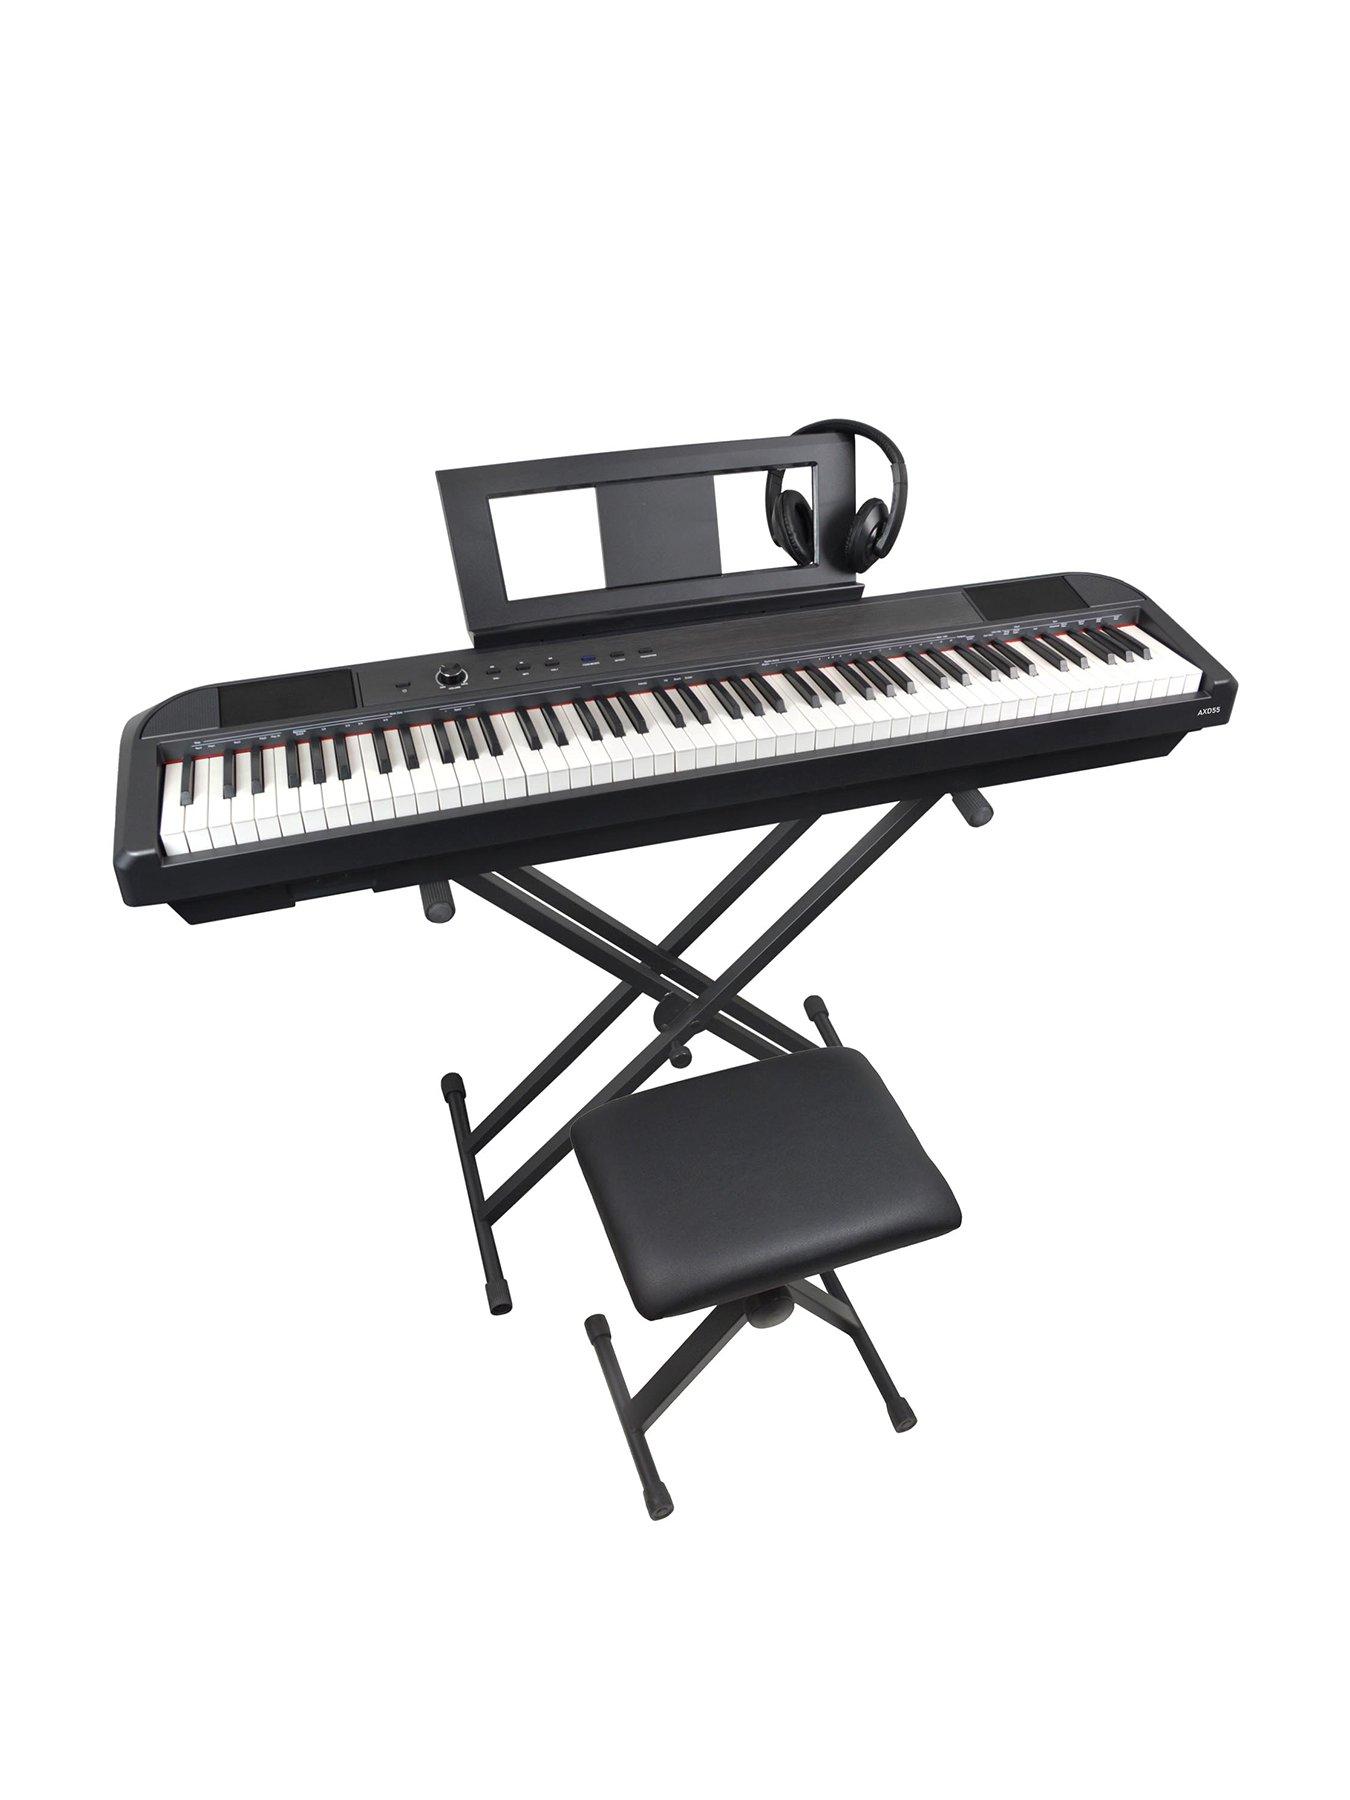 Axus 88 Key Portable Digital Piano Package In Black With Stand, Headphones And Bench